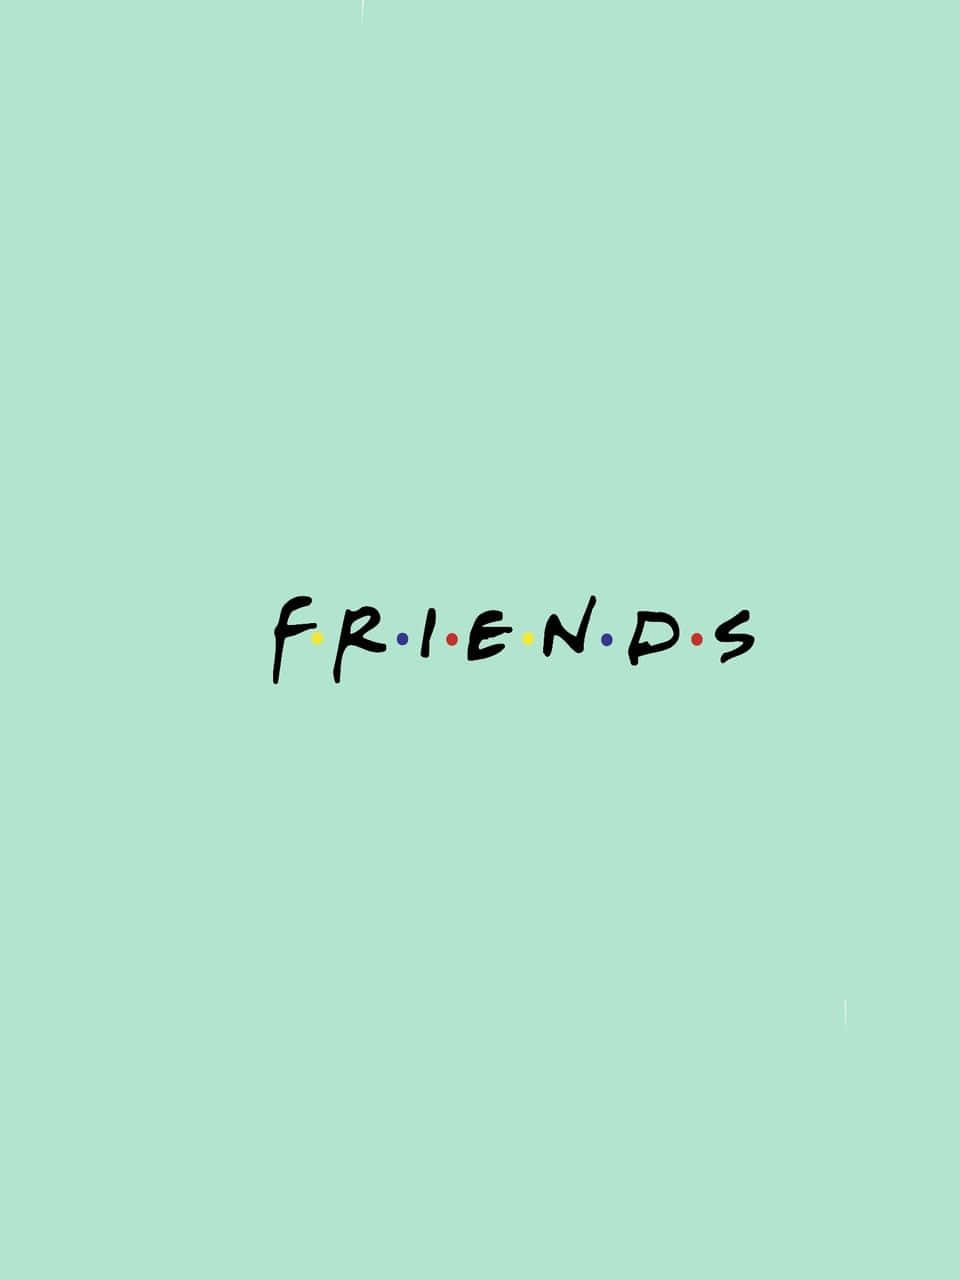 Download Pastel Green Background Friends Font | Wallpapers.com